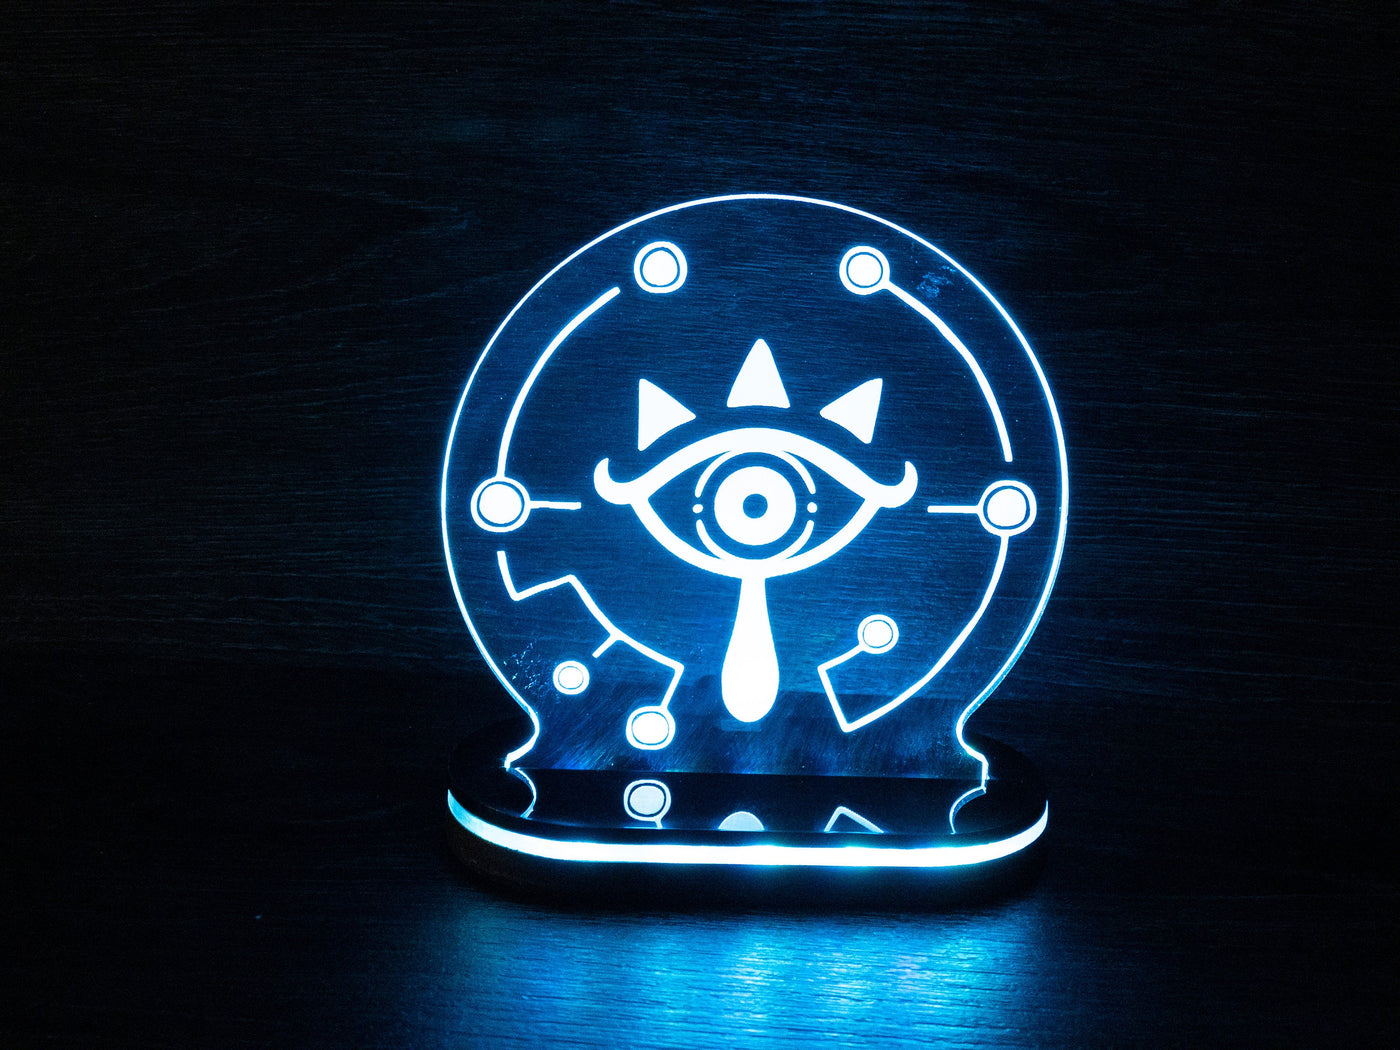 Legend of Zelda - LED Illuminated Lamp perfect as a gift for a fan. Place in Mancaves, bars, garages - Made in the USA!